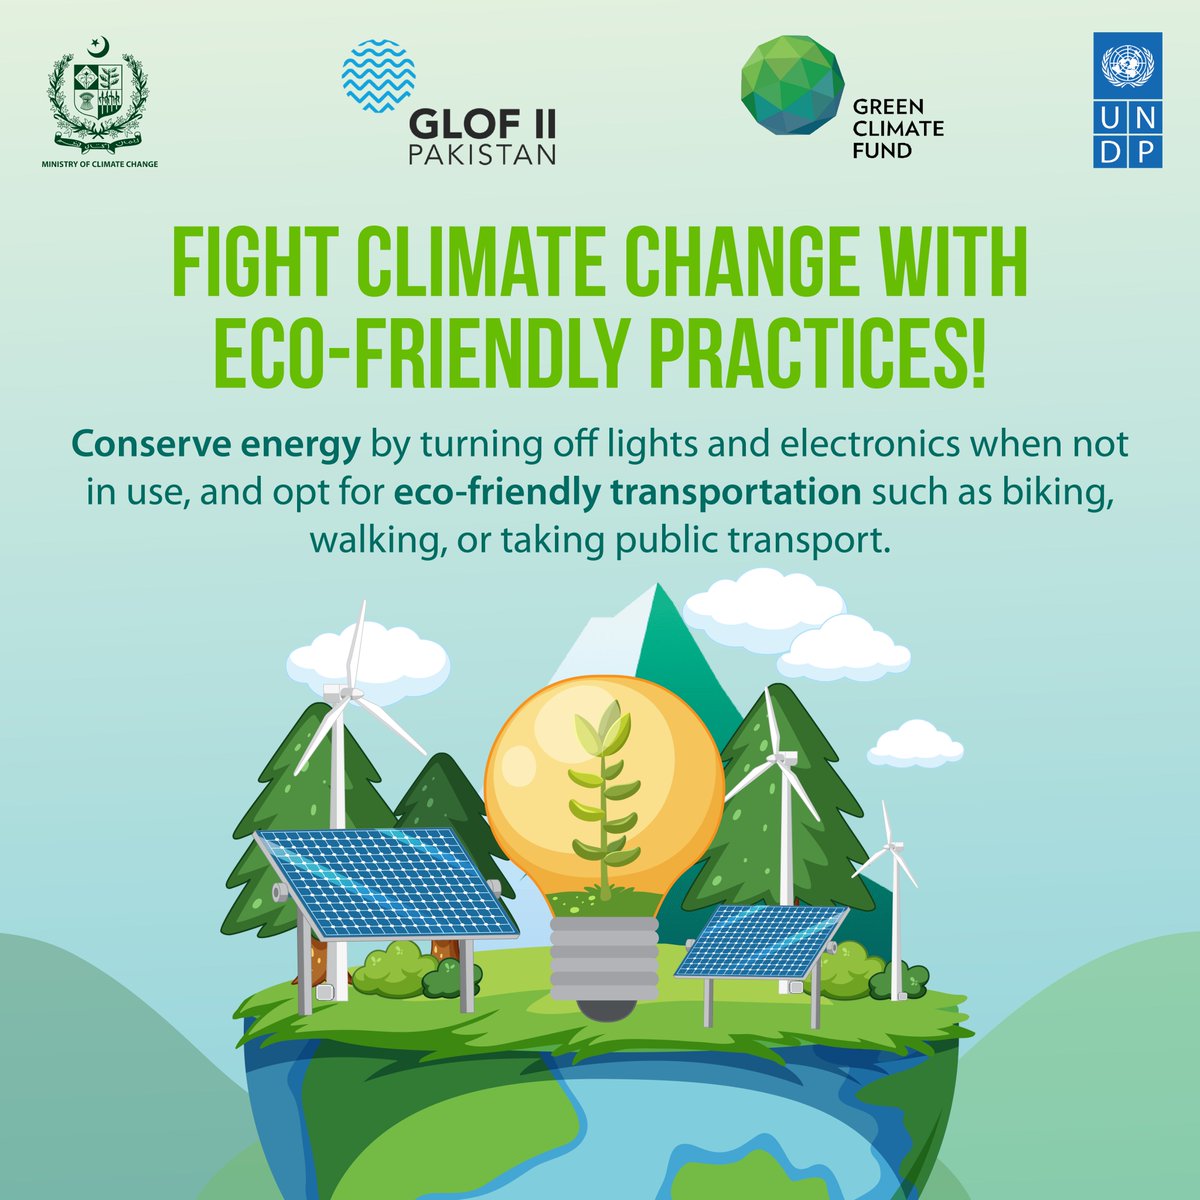 🏔️💡Conserve energy to protect our glaciers and habitats.

🚫🔌 Power down lights and electronics when not in use.

🚲🚶🚆 Embrace eco-friendly transportation like biking, walking, or public transport. 

@theGCF @ClimateChangePK @UNDP_Pakistan